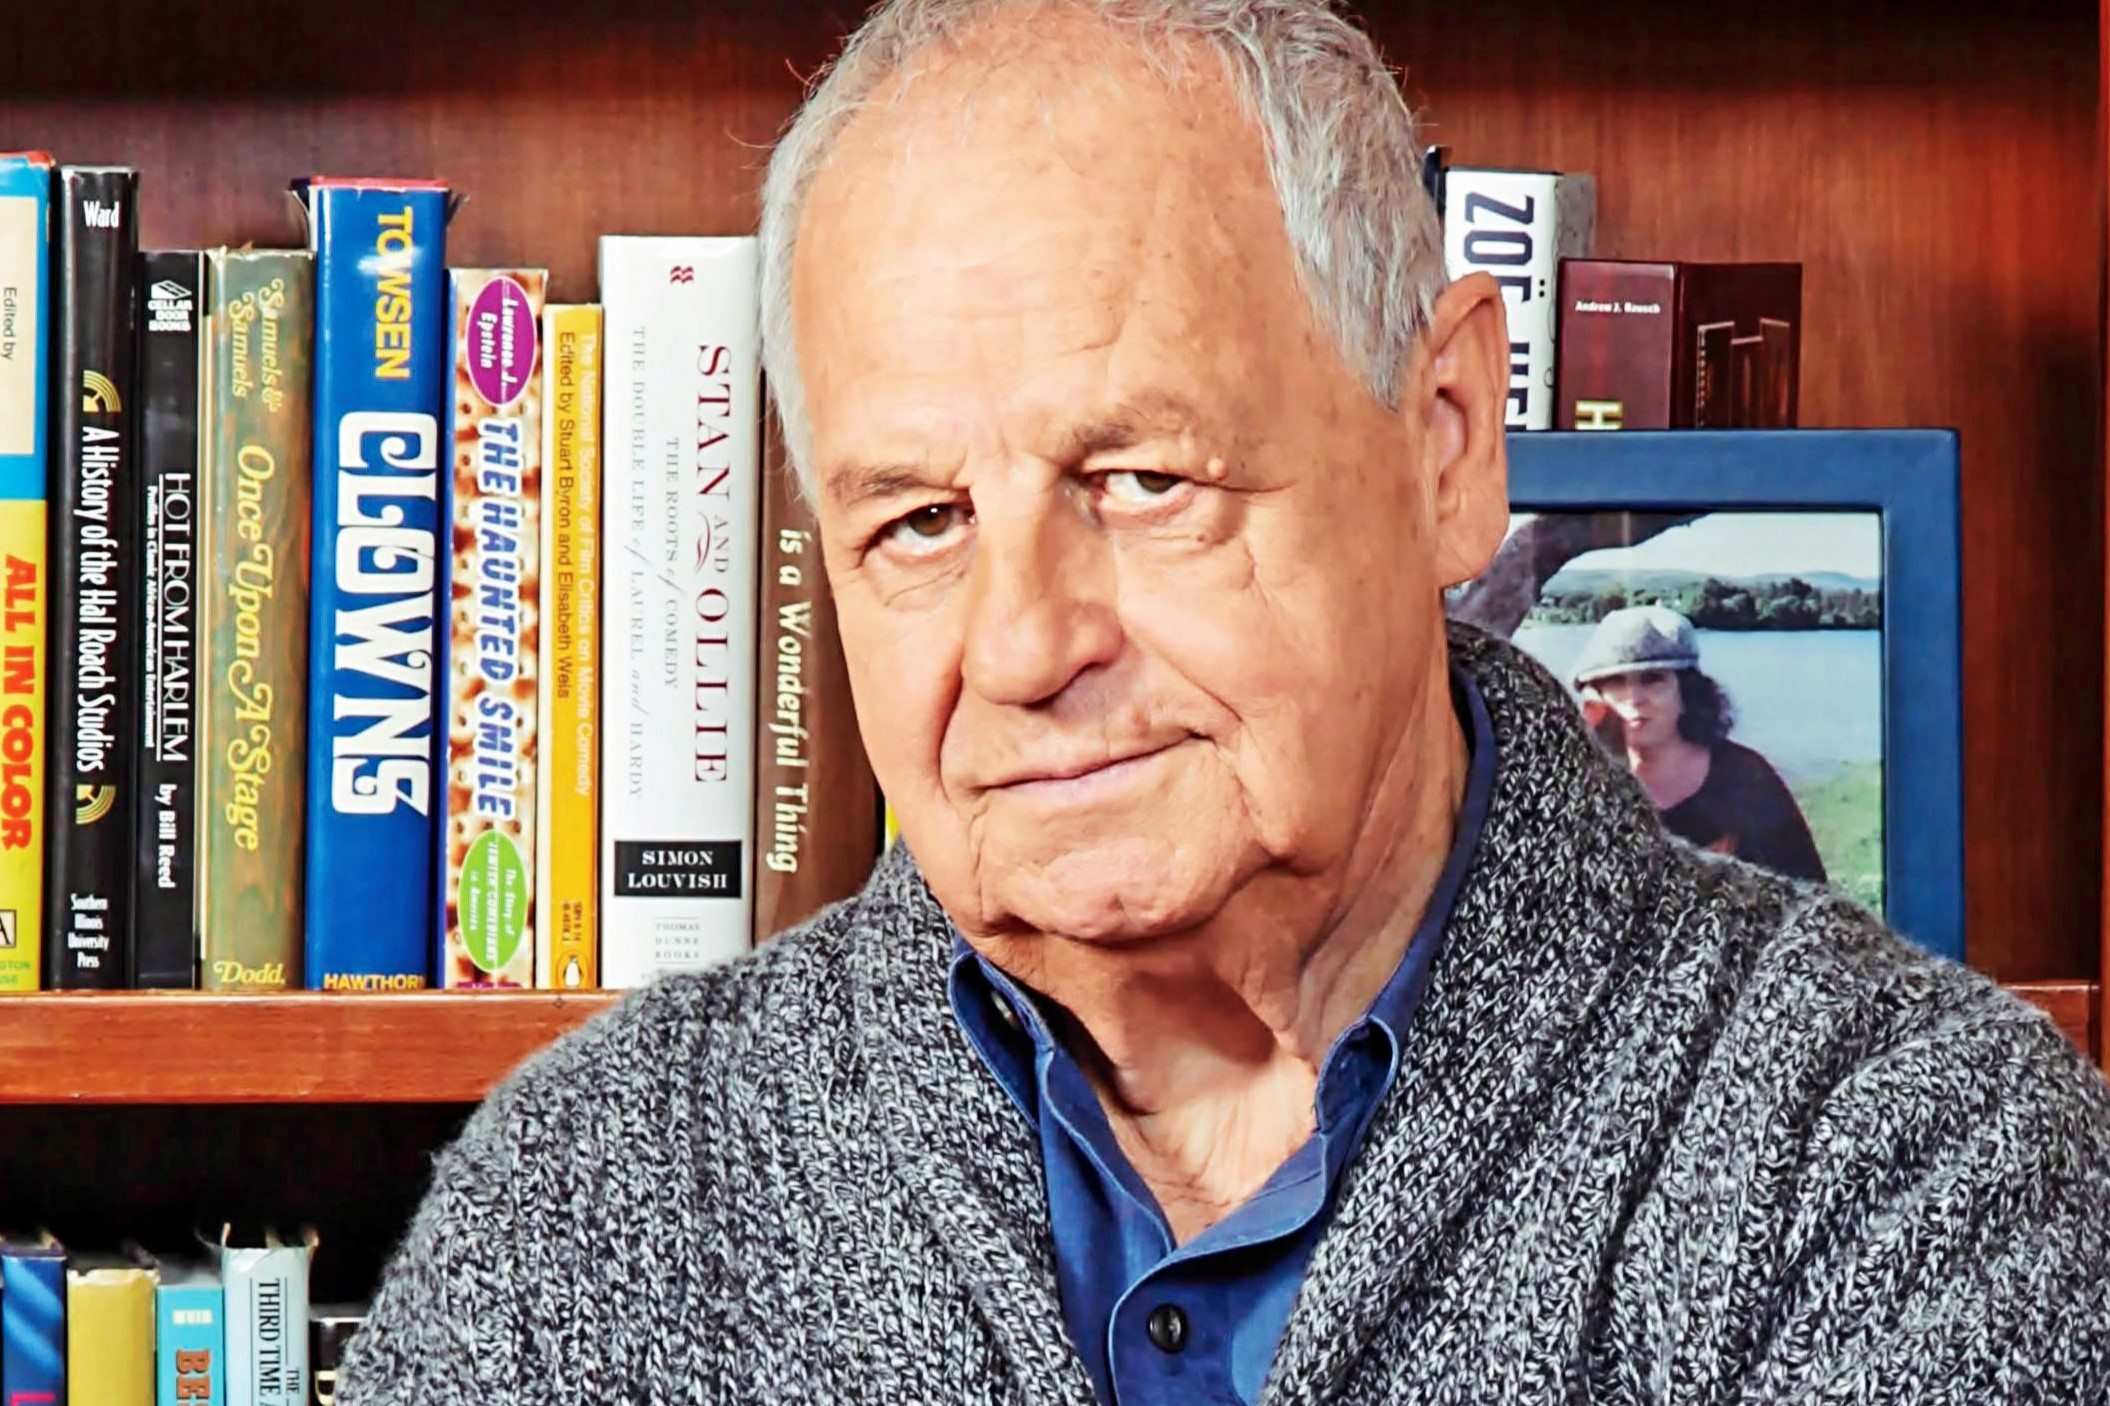 19-captivating-facts-about-paul-dooley